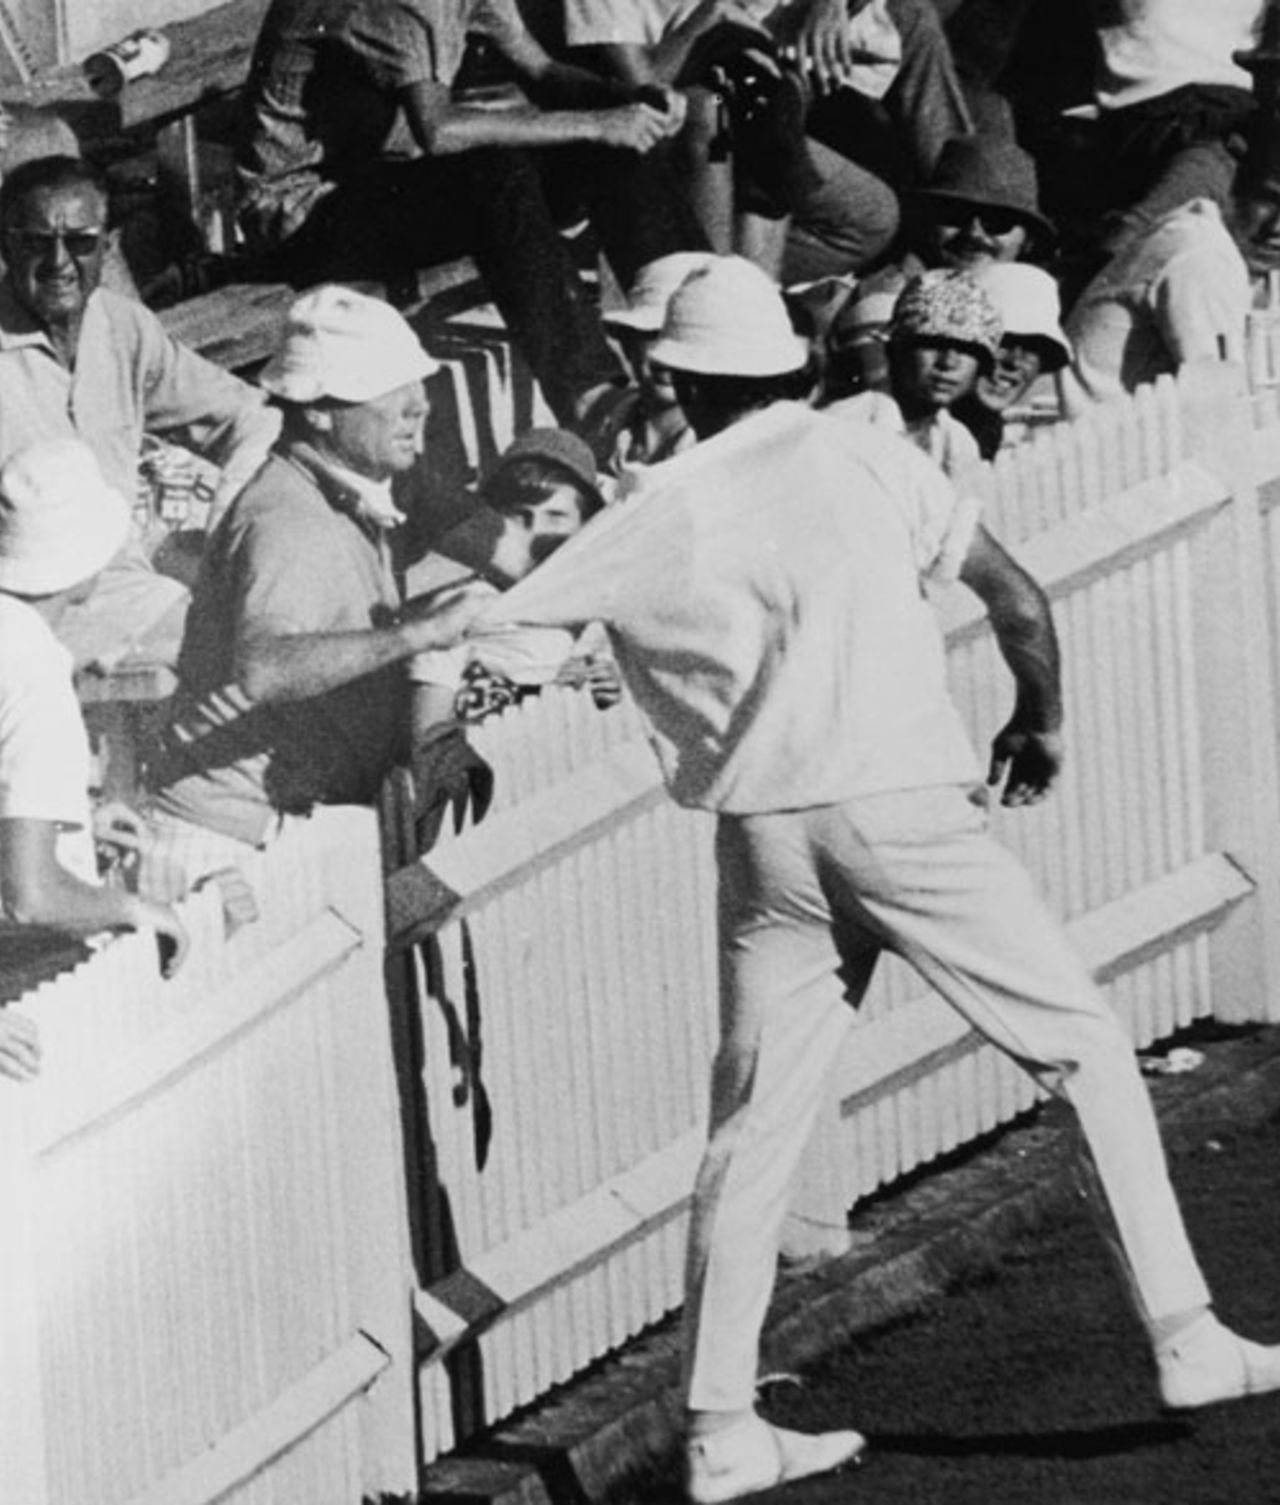 A member of the crowd has a heated exchange with John Snow, Australia v England, 7th Test, Sydney, 2nd day, February 13, 1971